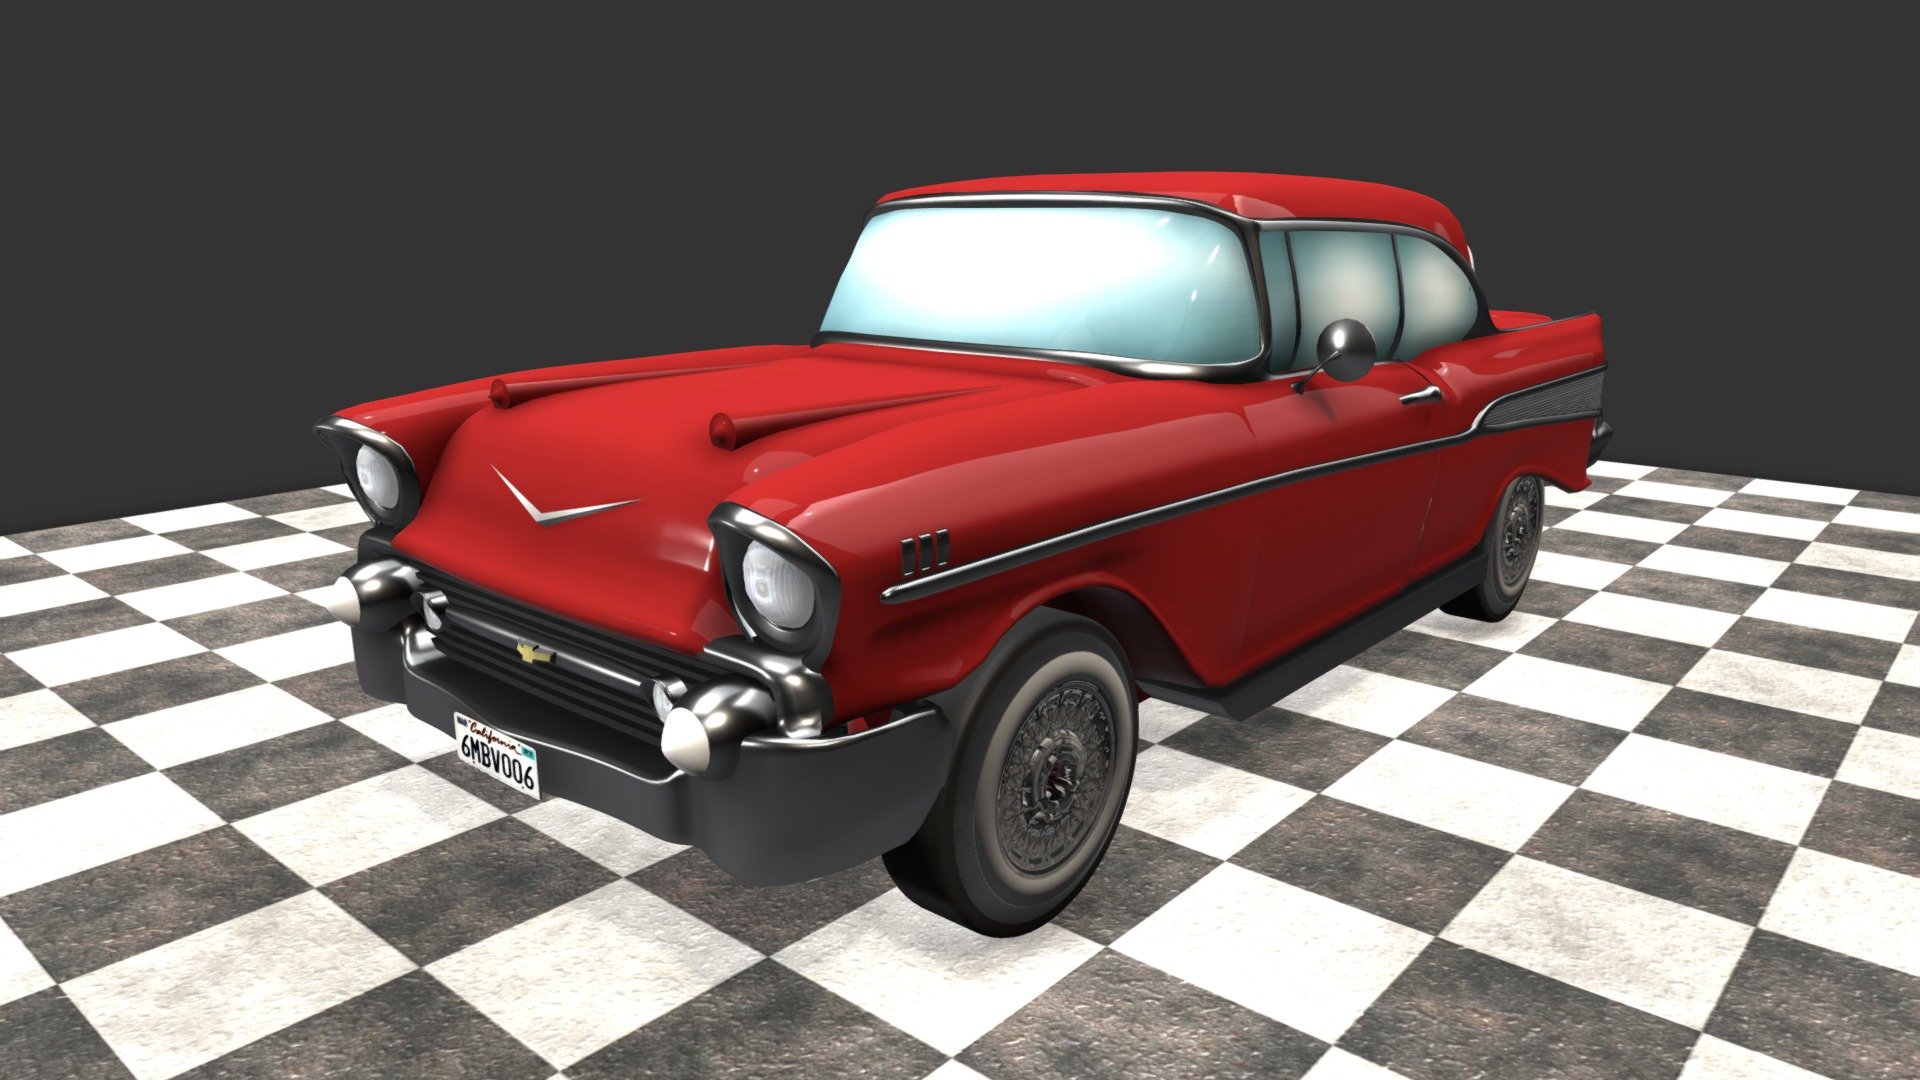 Here you have my very first 3D car model made for render. It is a Chevrolet Bel Air from 1957, and it has been completely made using 3ds Max, including the materials, using Mental Ray renderer.

Final render post-processed with Photoshop:





This work is licensed under a Creative Commons Attribution-NonCommercial-NoDerivatives 4.0 International License - Chevrolet Bel Air 1957 - 3D model by Ningyo Quimera (@ningyoquimera) 3d model